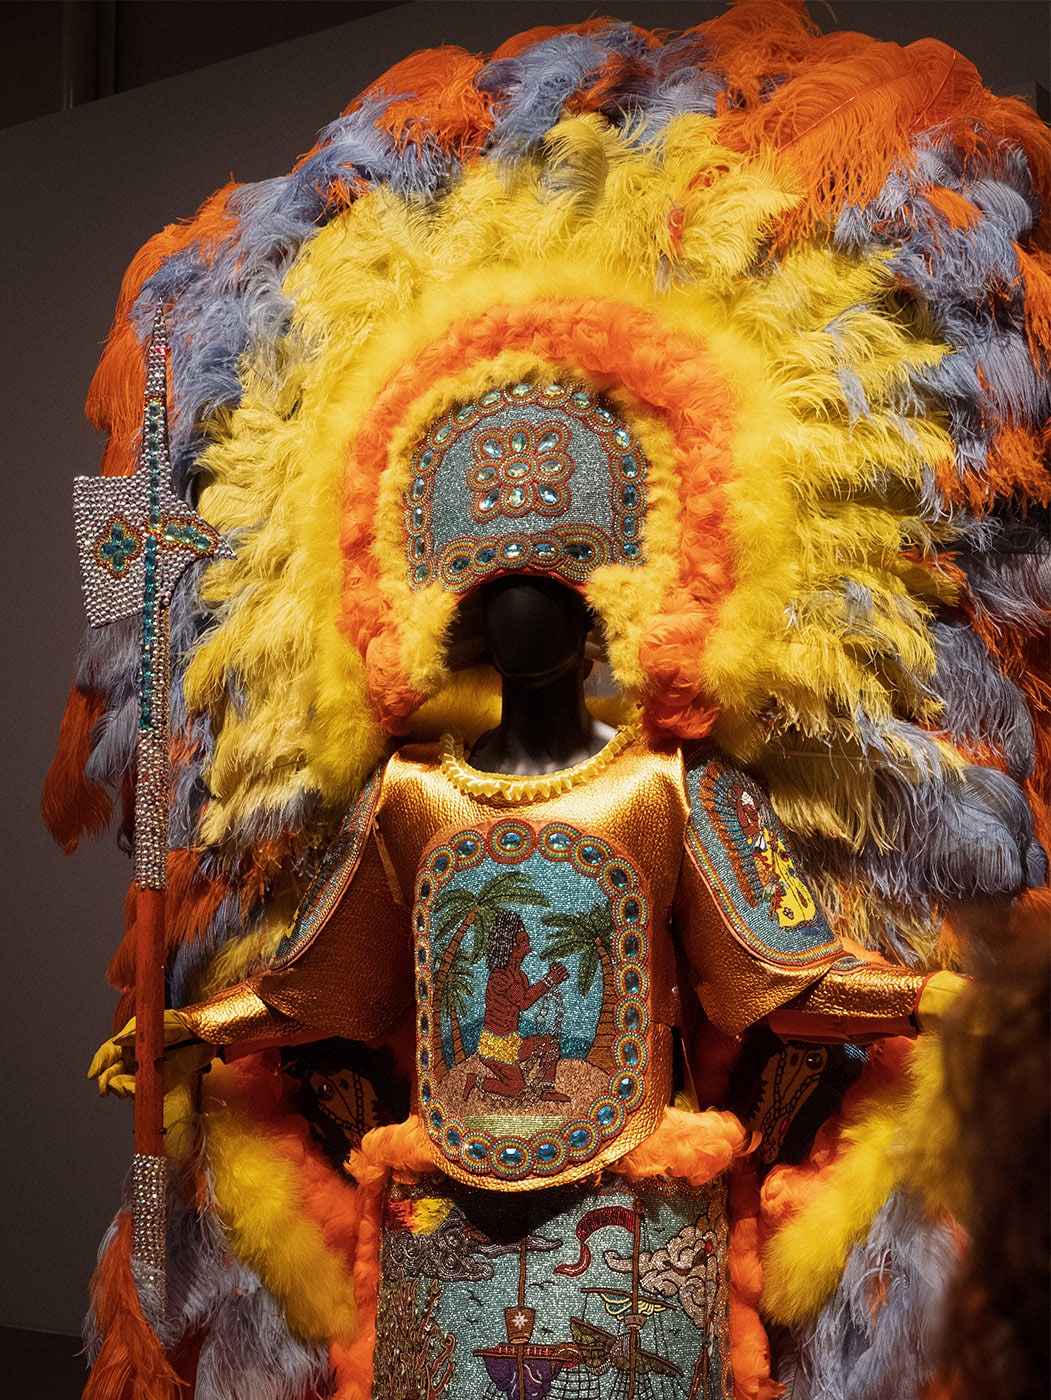 Black Indians at the Quai Branly-Jacques Chirac museum: the traditions of the New Orleans carnival 8